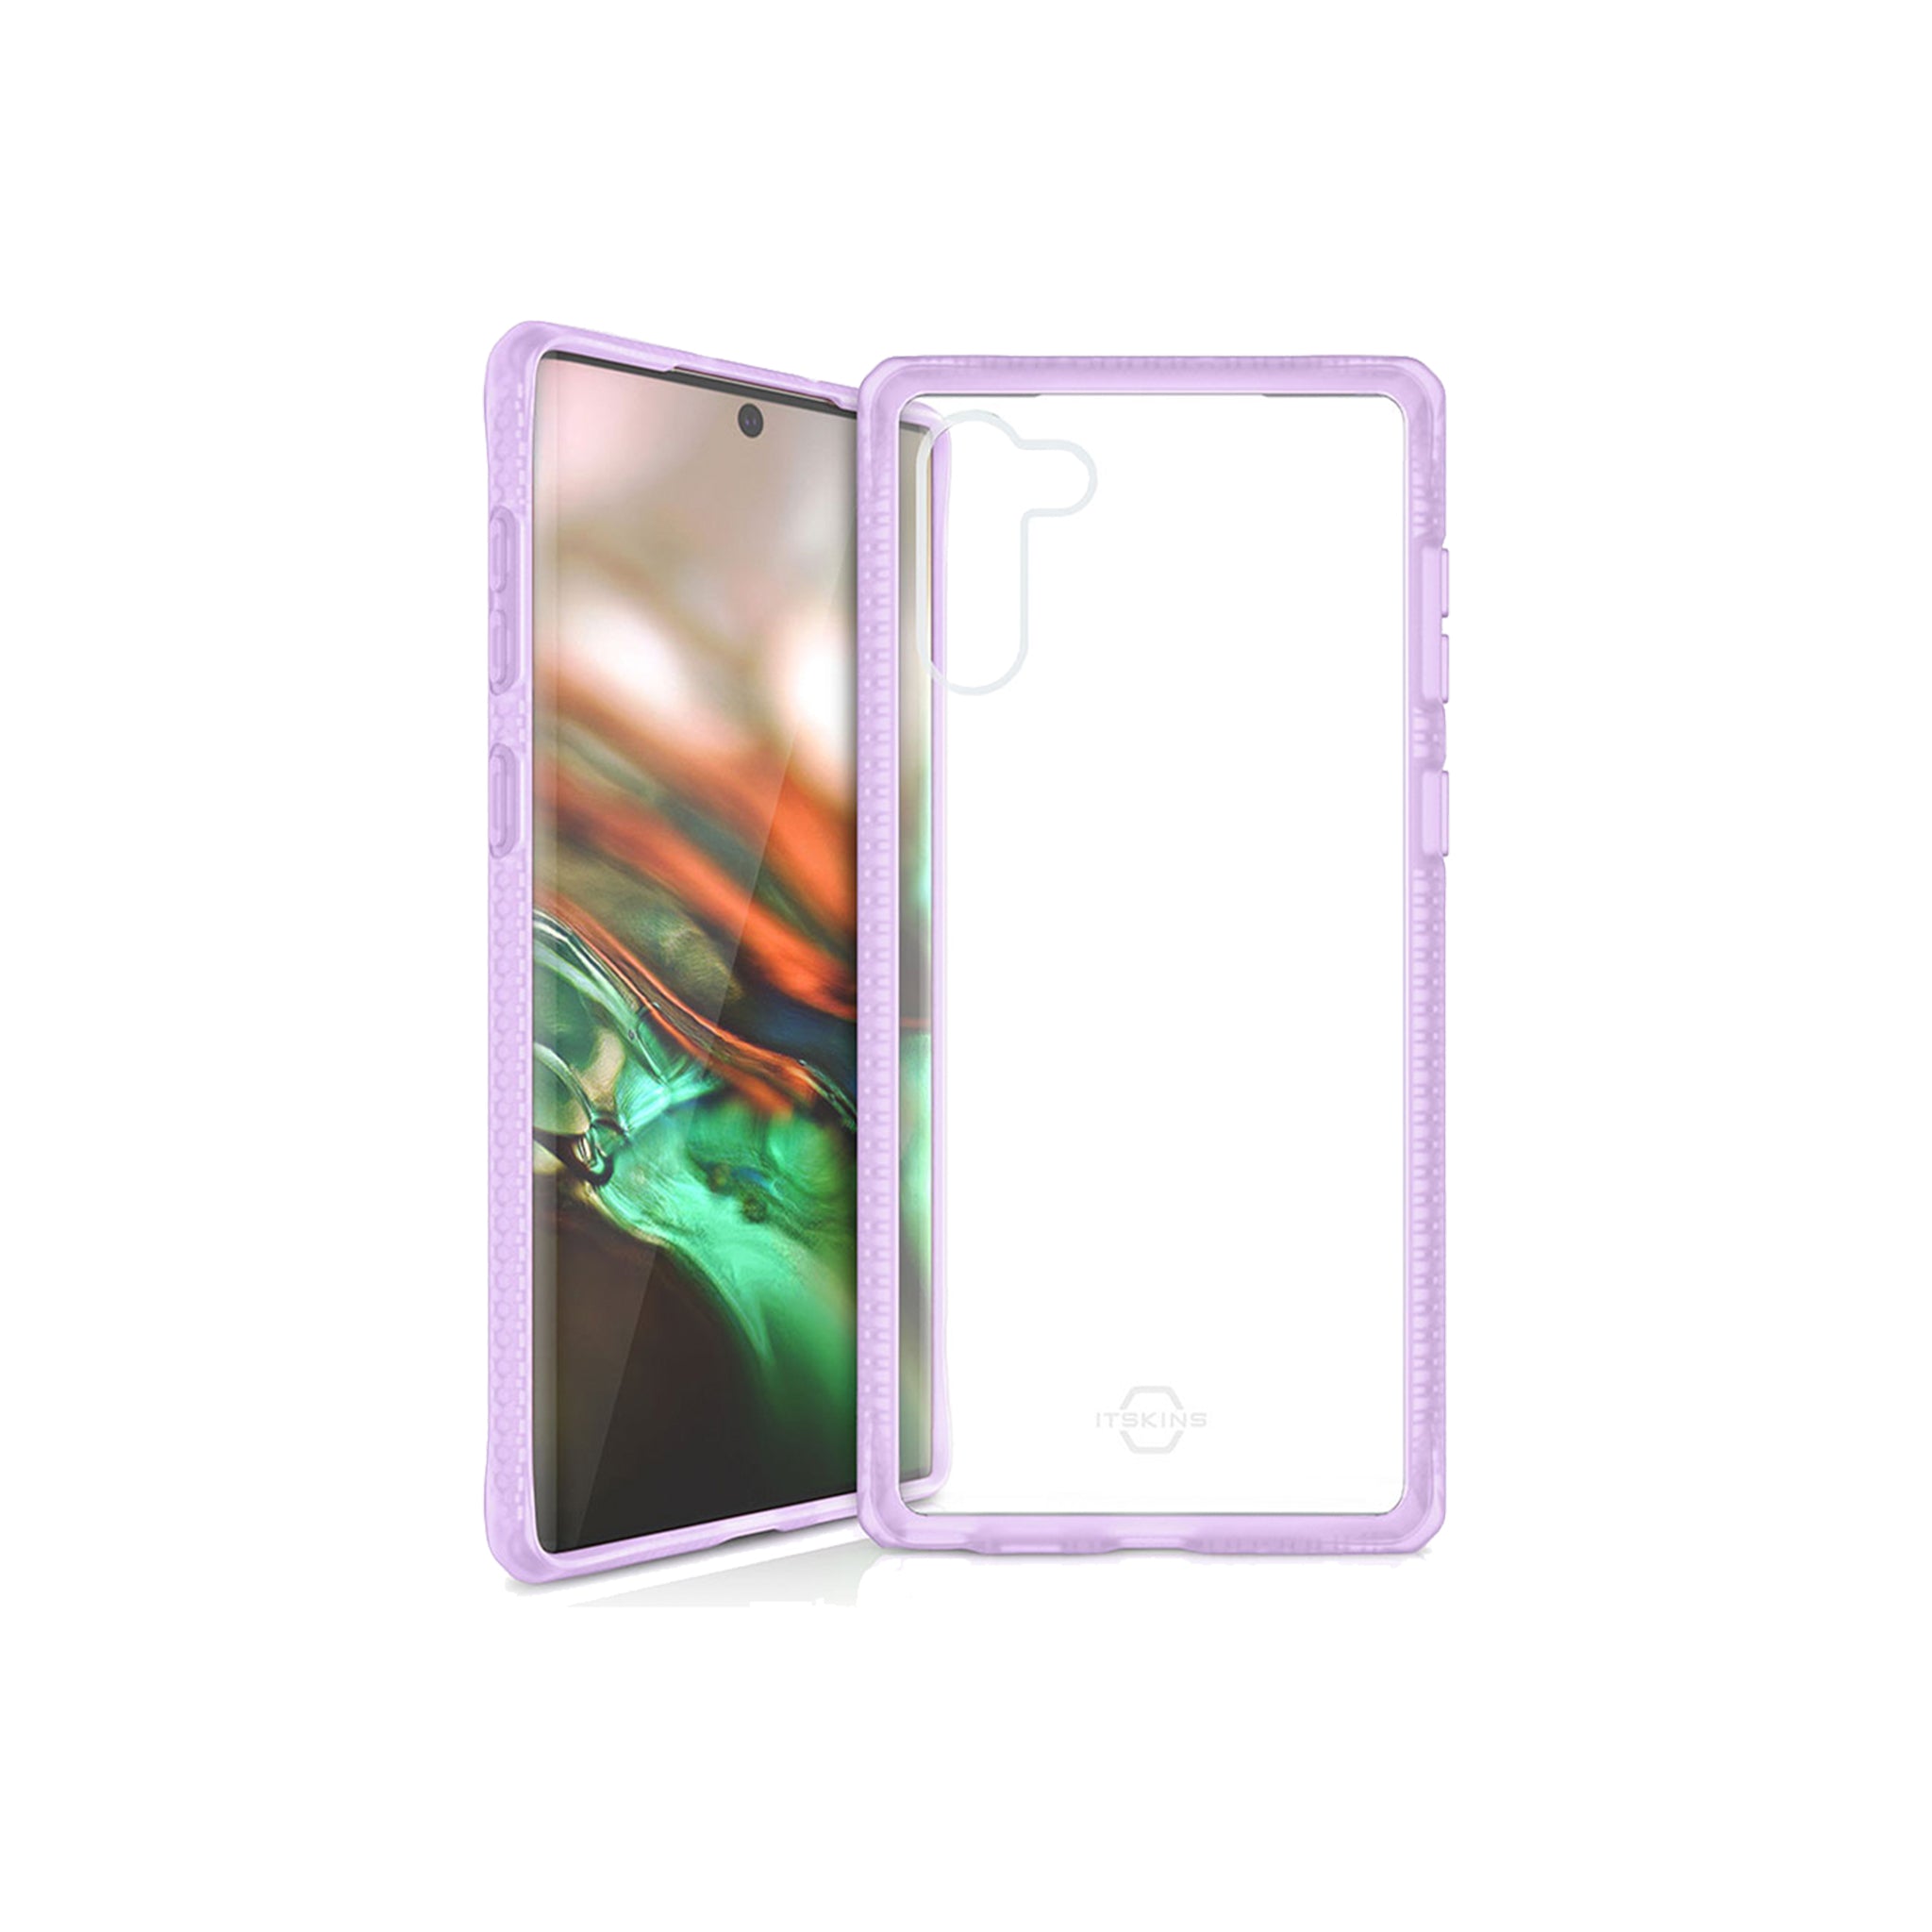 Itskins - Hybrid Frost Mkii Case For Samsung Galaxy Note 10 - Light Purple And Transparent